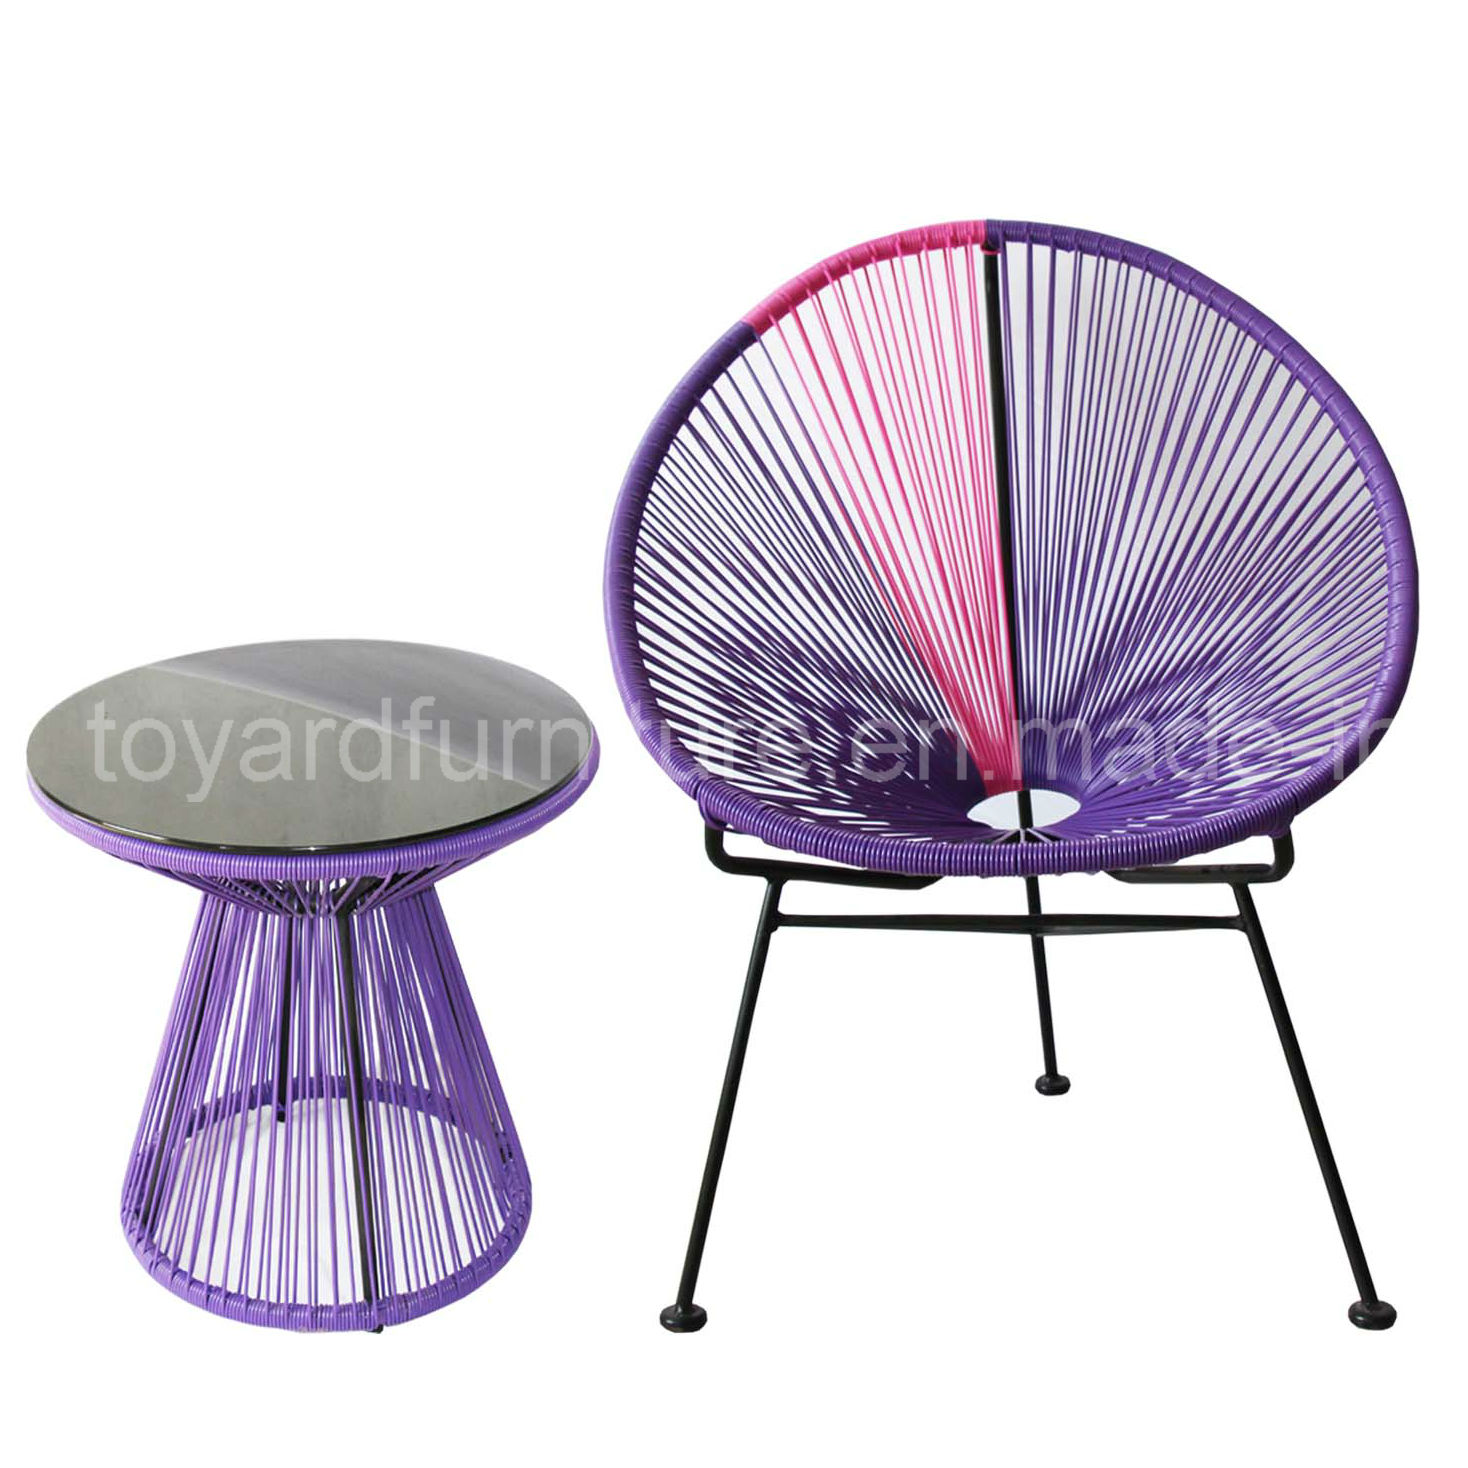 2-Years Warranty Outdoor Plastic Living Leisure Chair